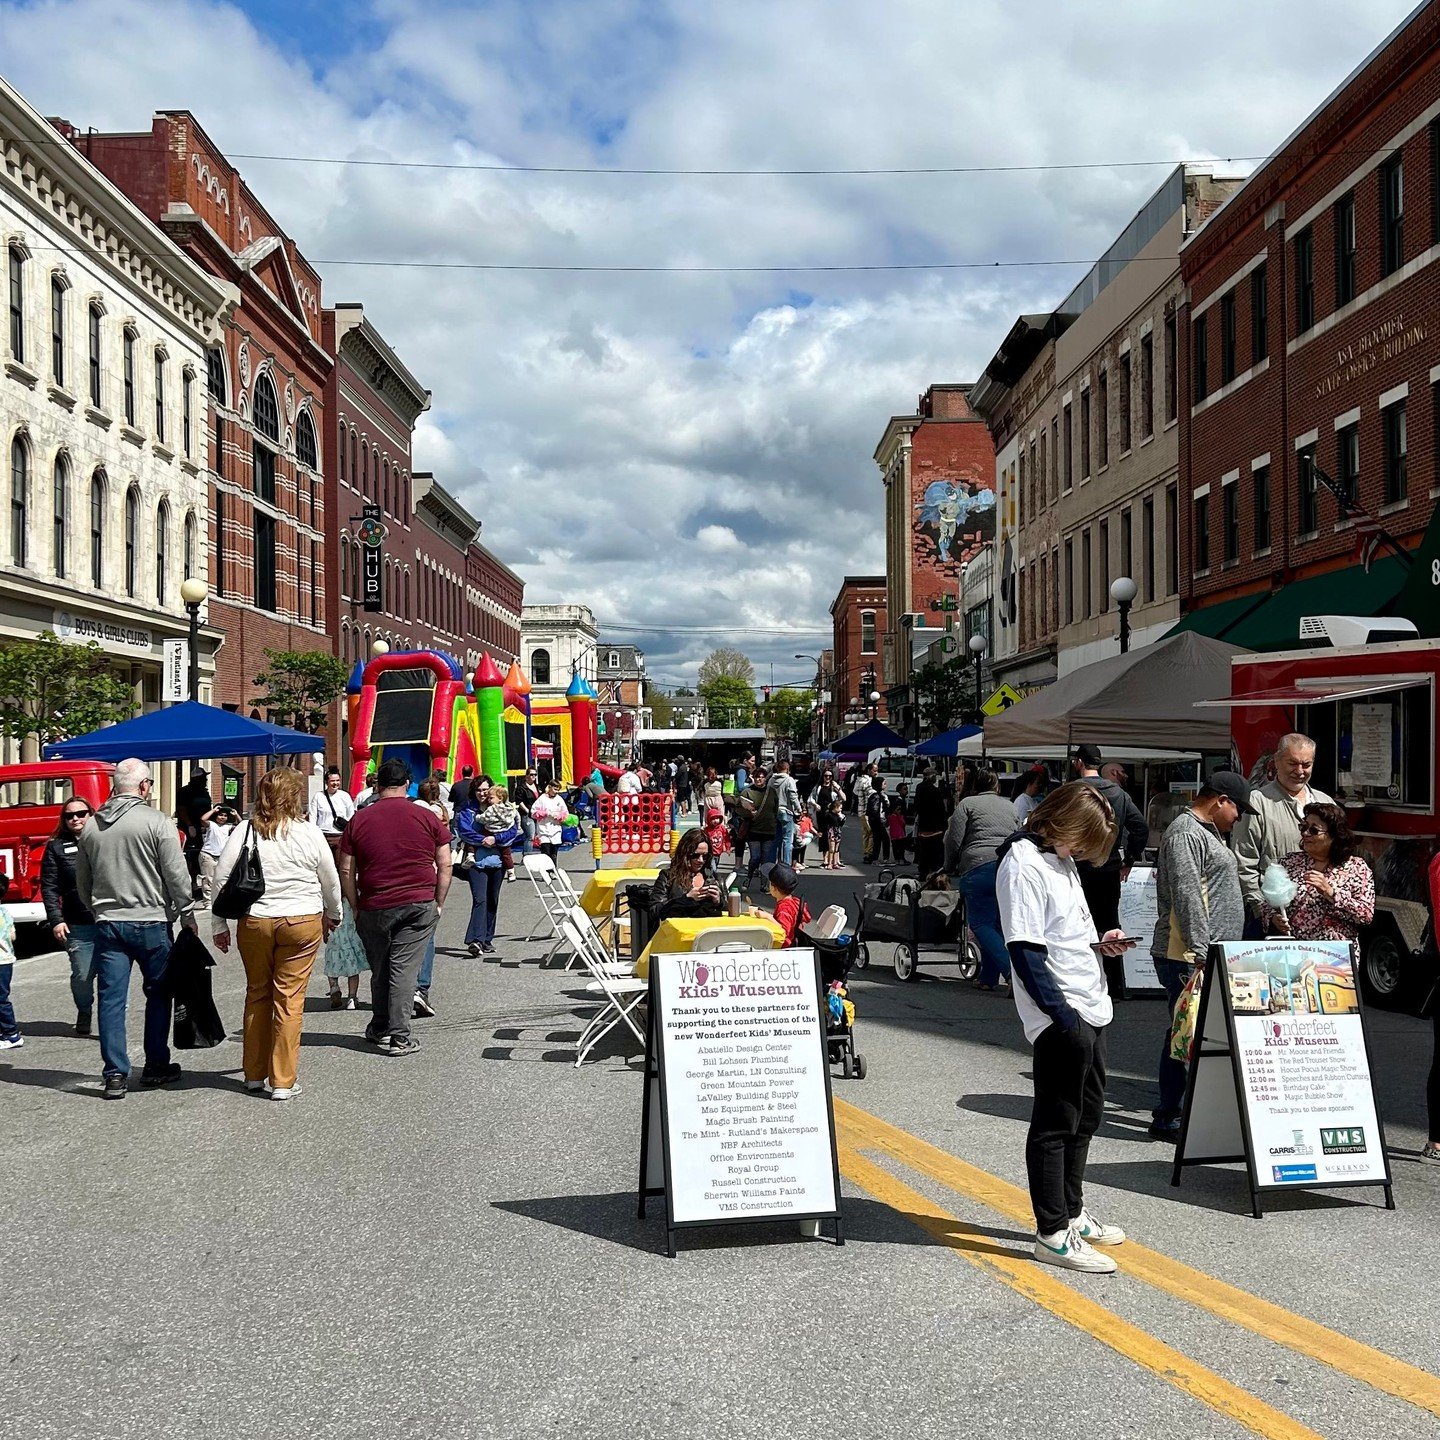 It's a great day to visit Downtown Rutland, Vermont! Come to @downtownrutland today for:

&bull; @vermontfarmersmarket first outdoor market at Depot Park from 9am-2pm
&bull; @wonderfeetkidsmuseum Grand Opening &amp; Birthday Celebration! on Merchants